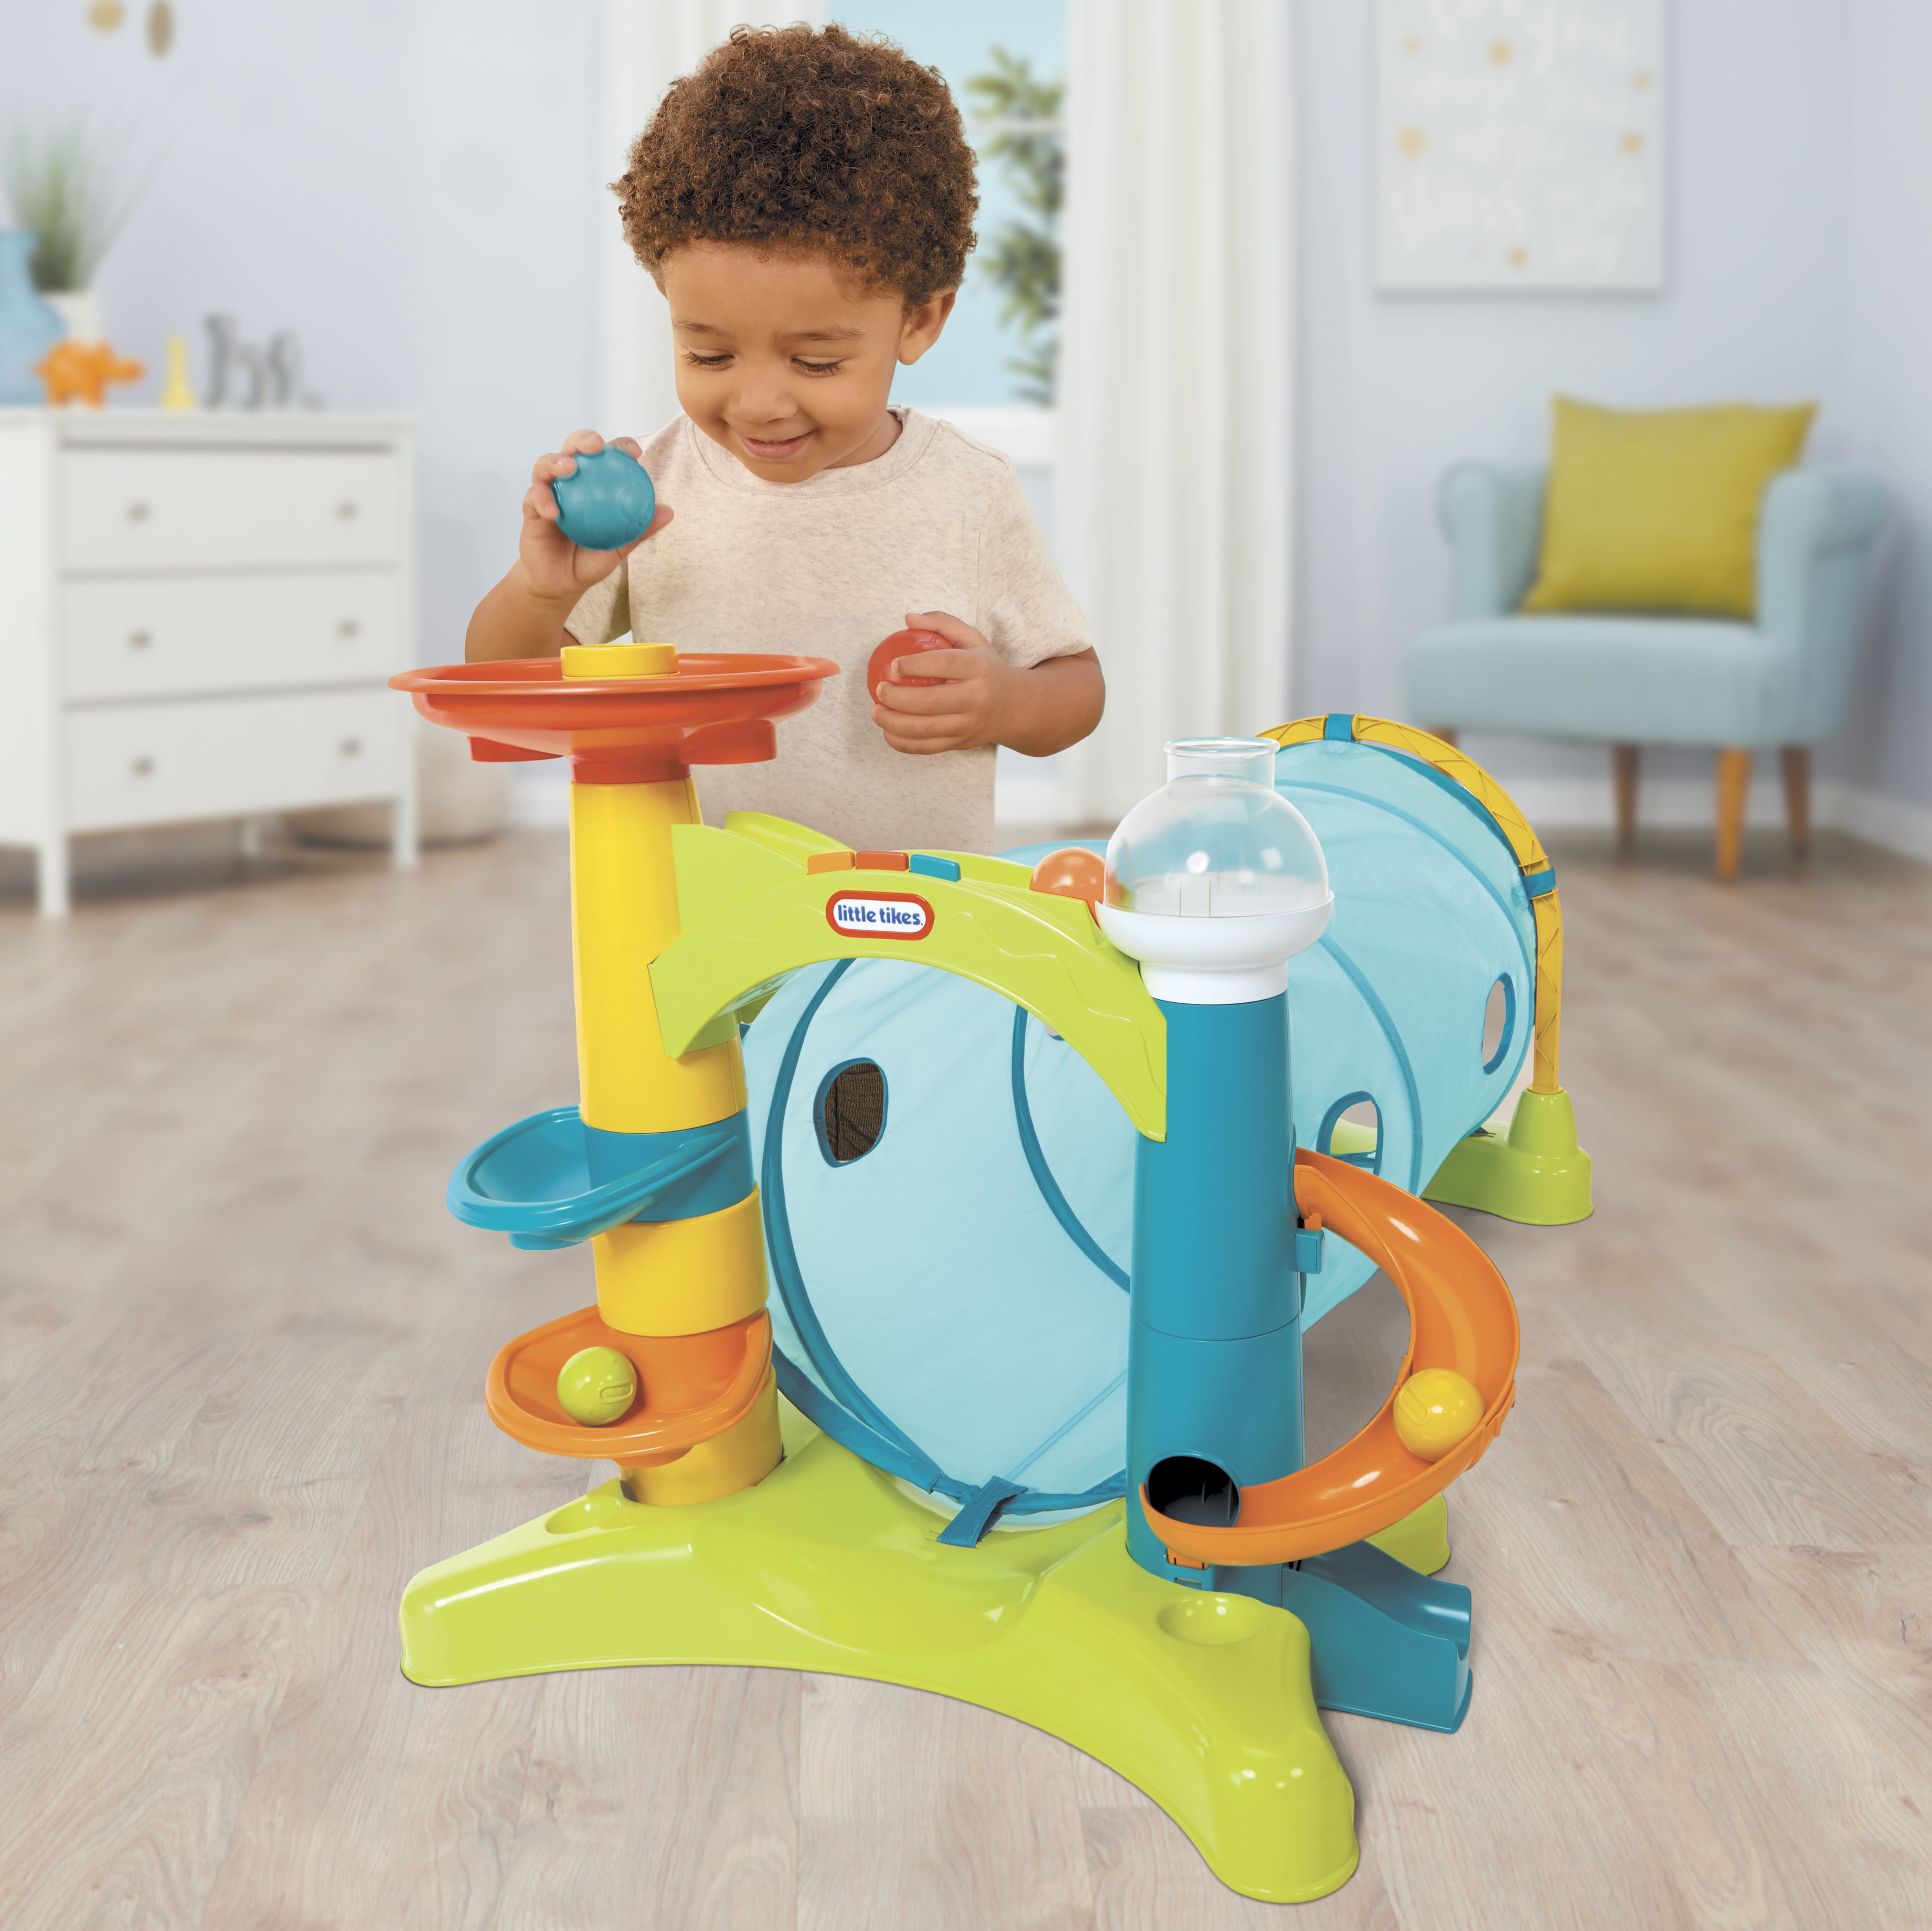 Little Tikes® Learn & Play™ 2-in-1 Activity Tunnel with Ball Drop, Windows,  Silly Sounds, and Music for Kids Ages 1 - 3